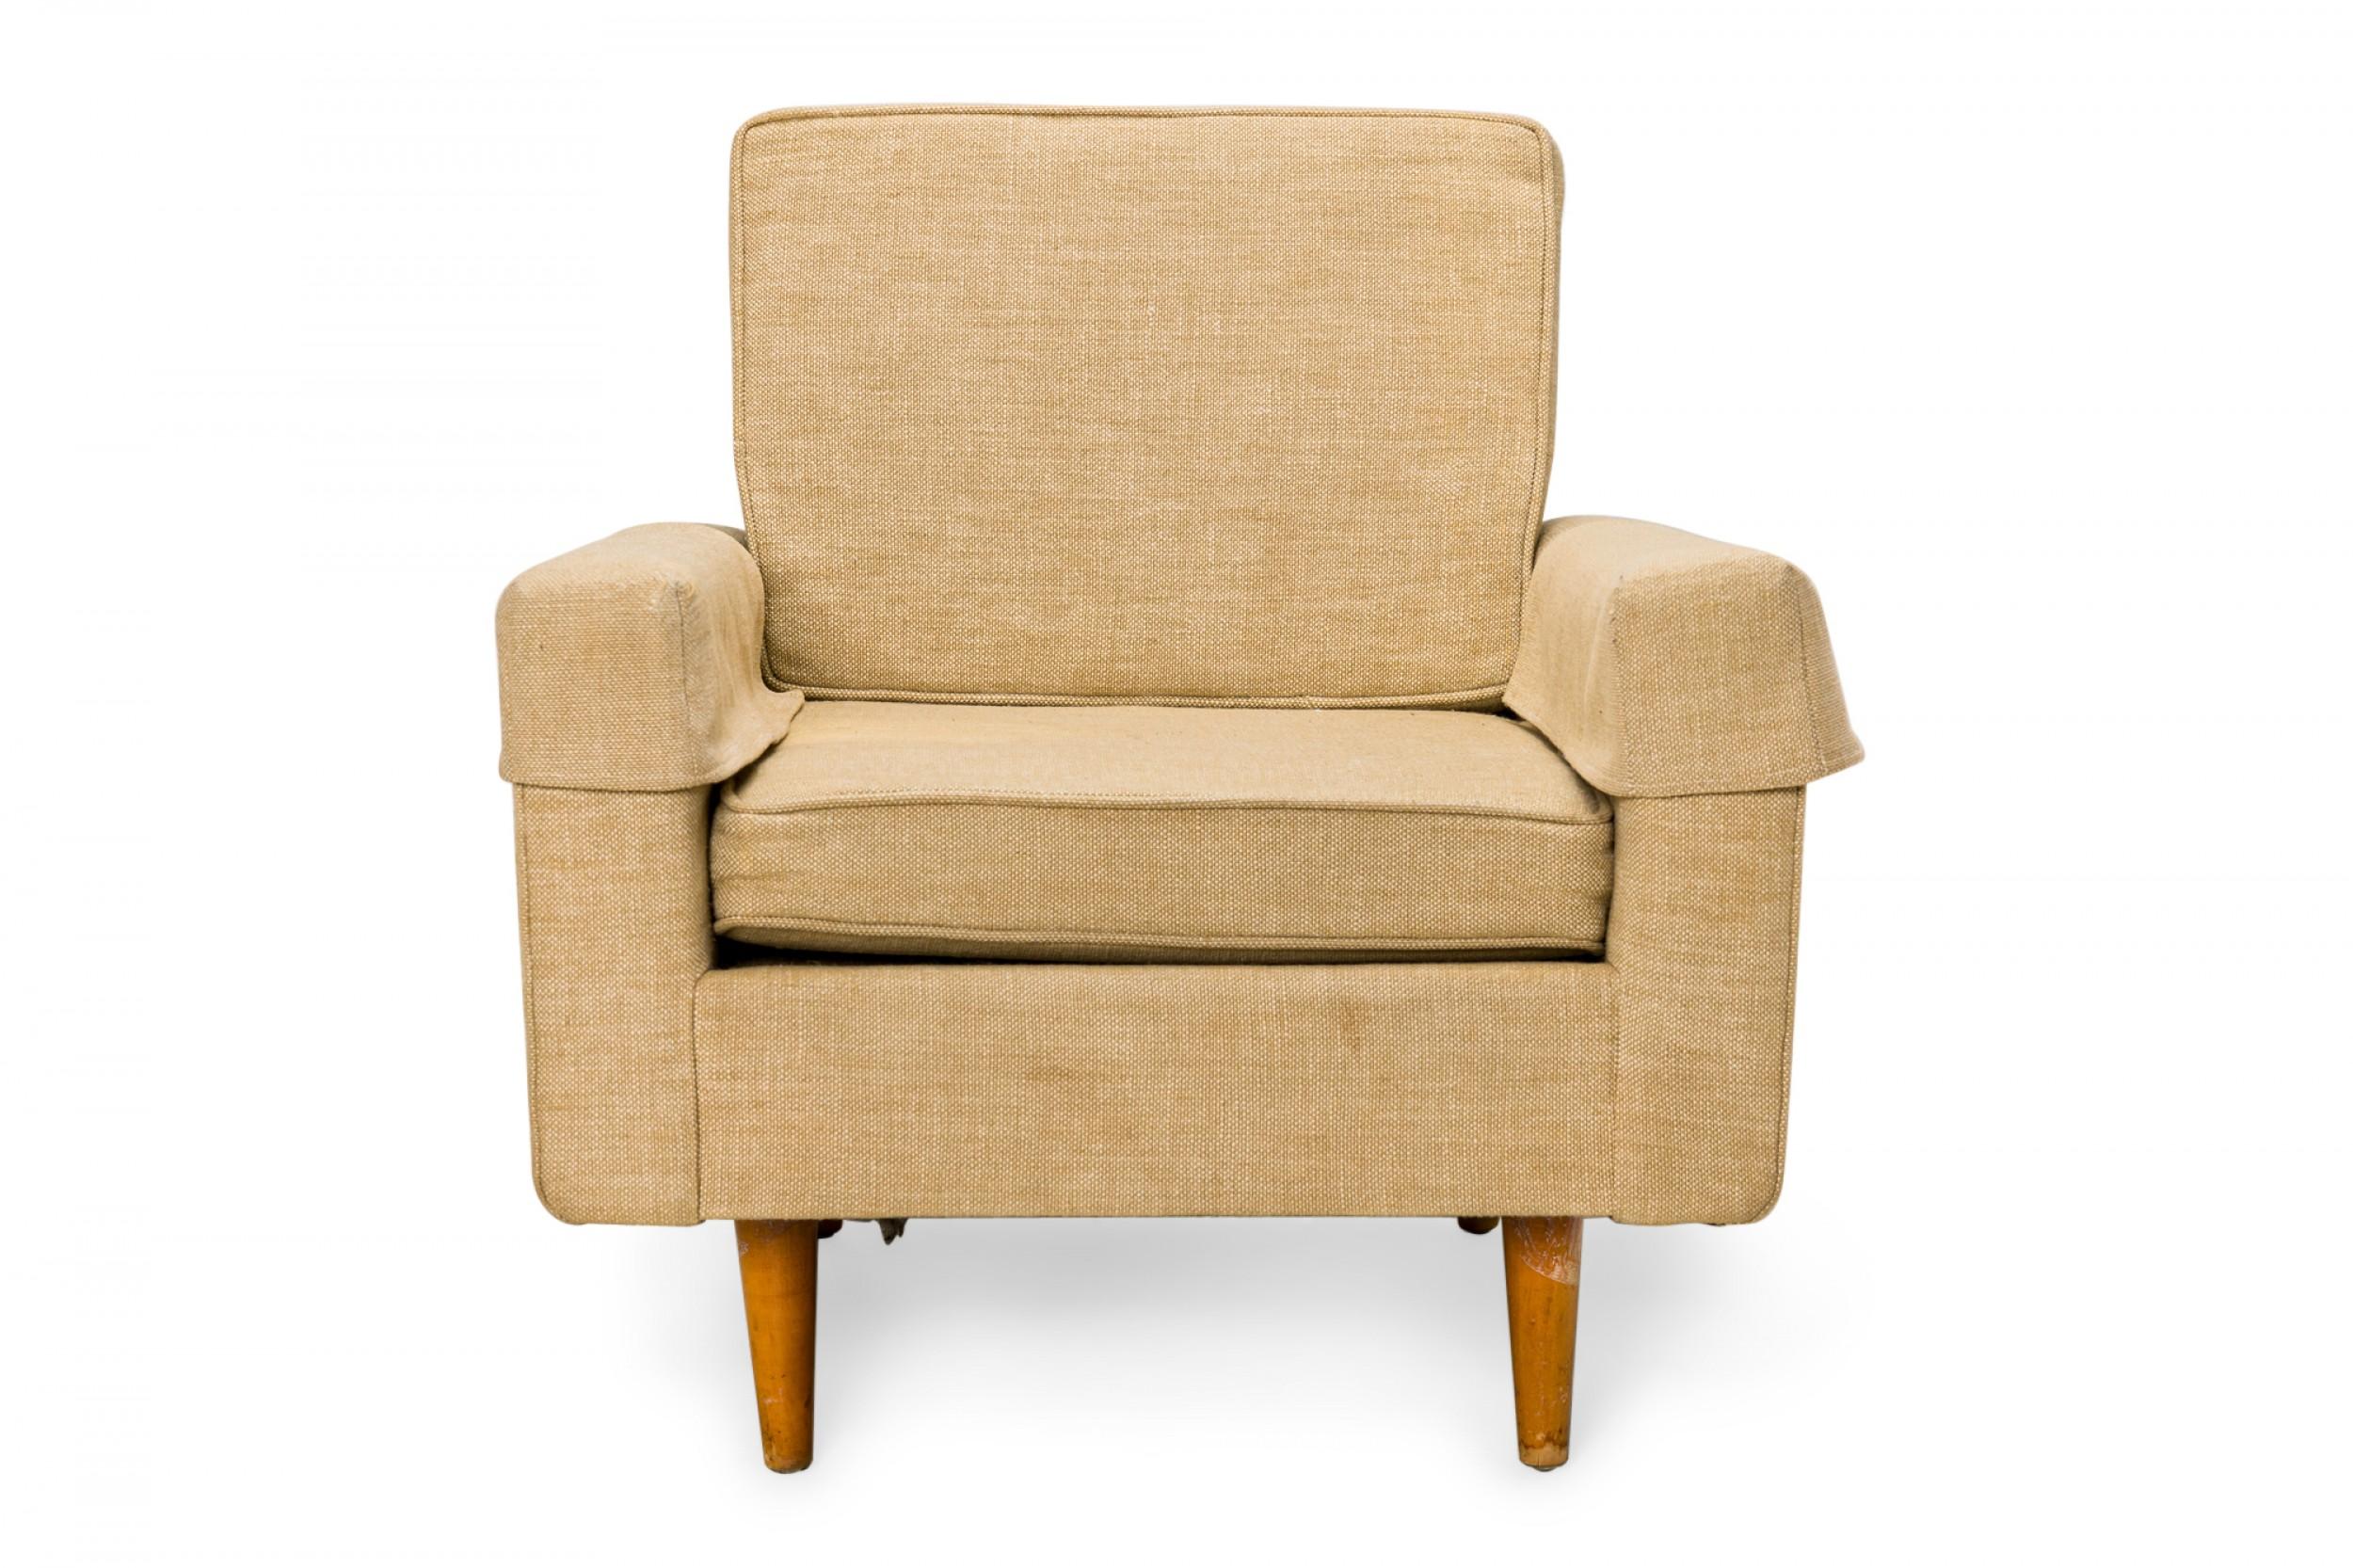 American mid-century lounge armchair with beige textured fabric upholstery and matching antimacassars, resting on four broad tapered wooden legs.(FLORENCE KNOLL FOR KNOLL INTERNATIONAL)